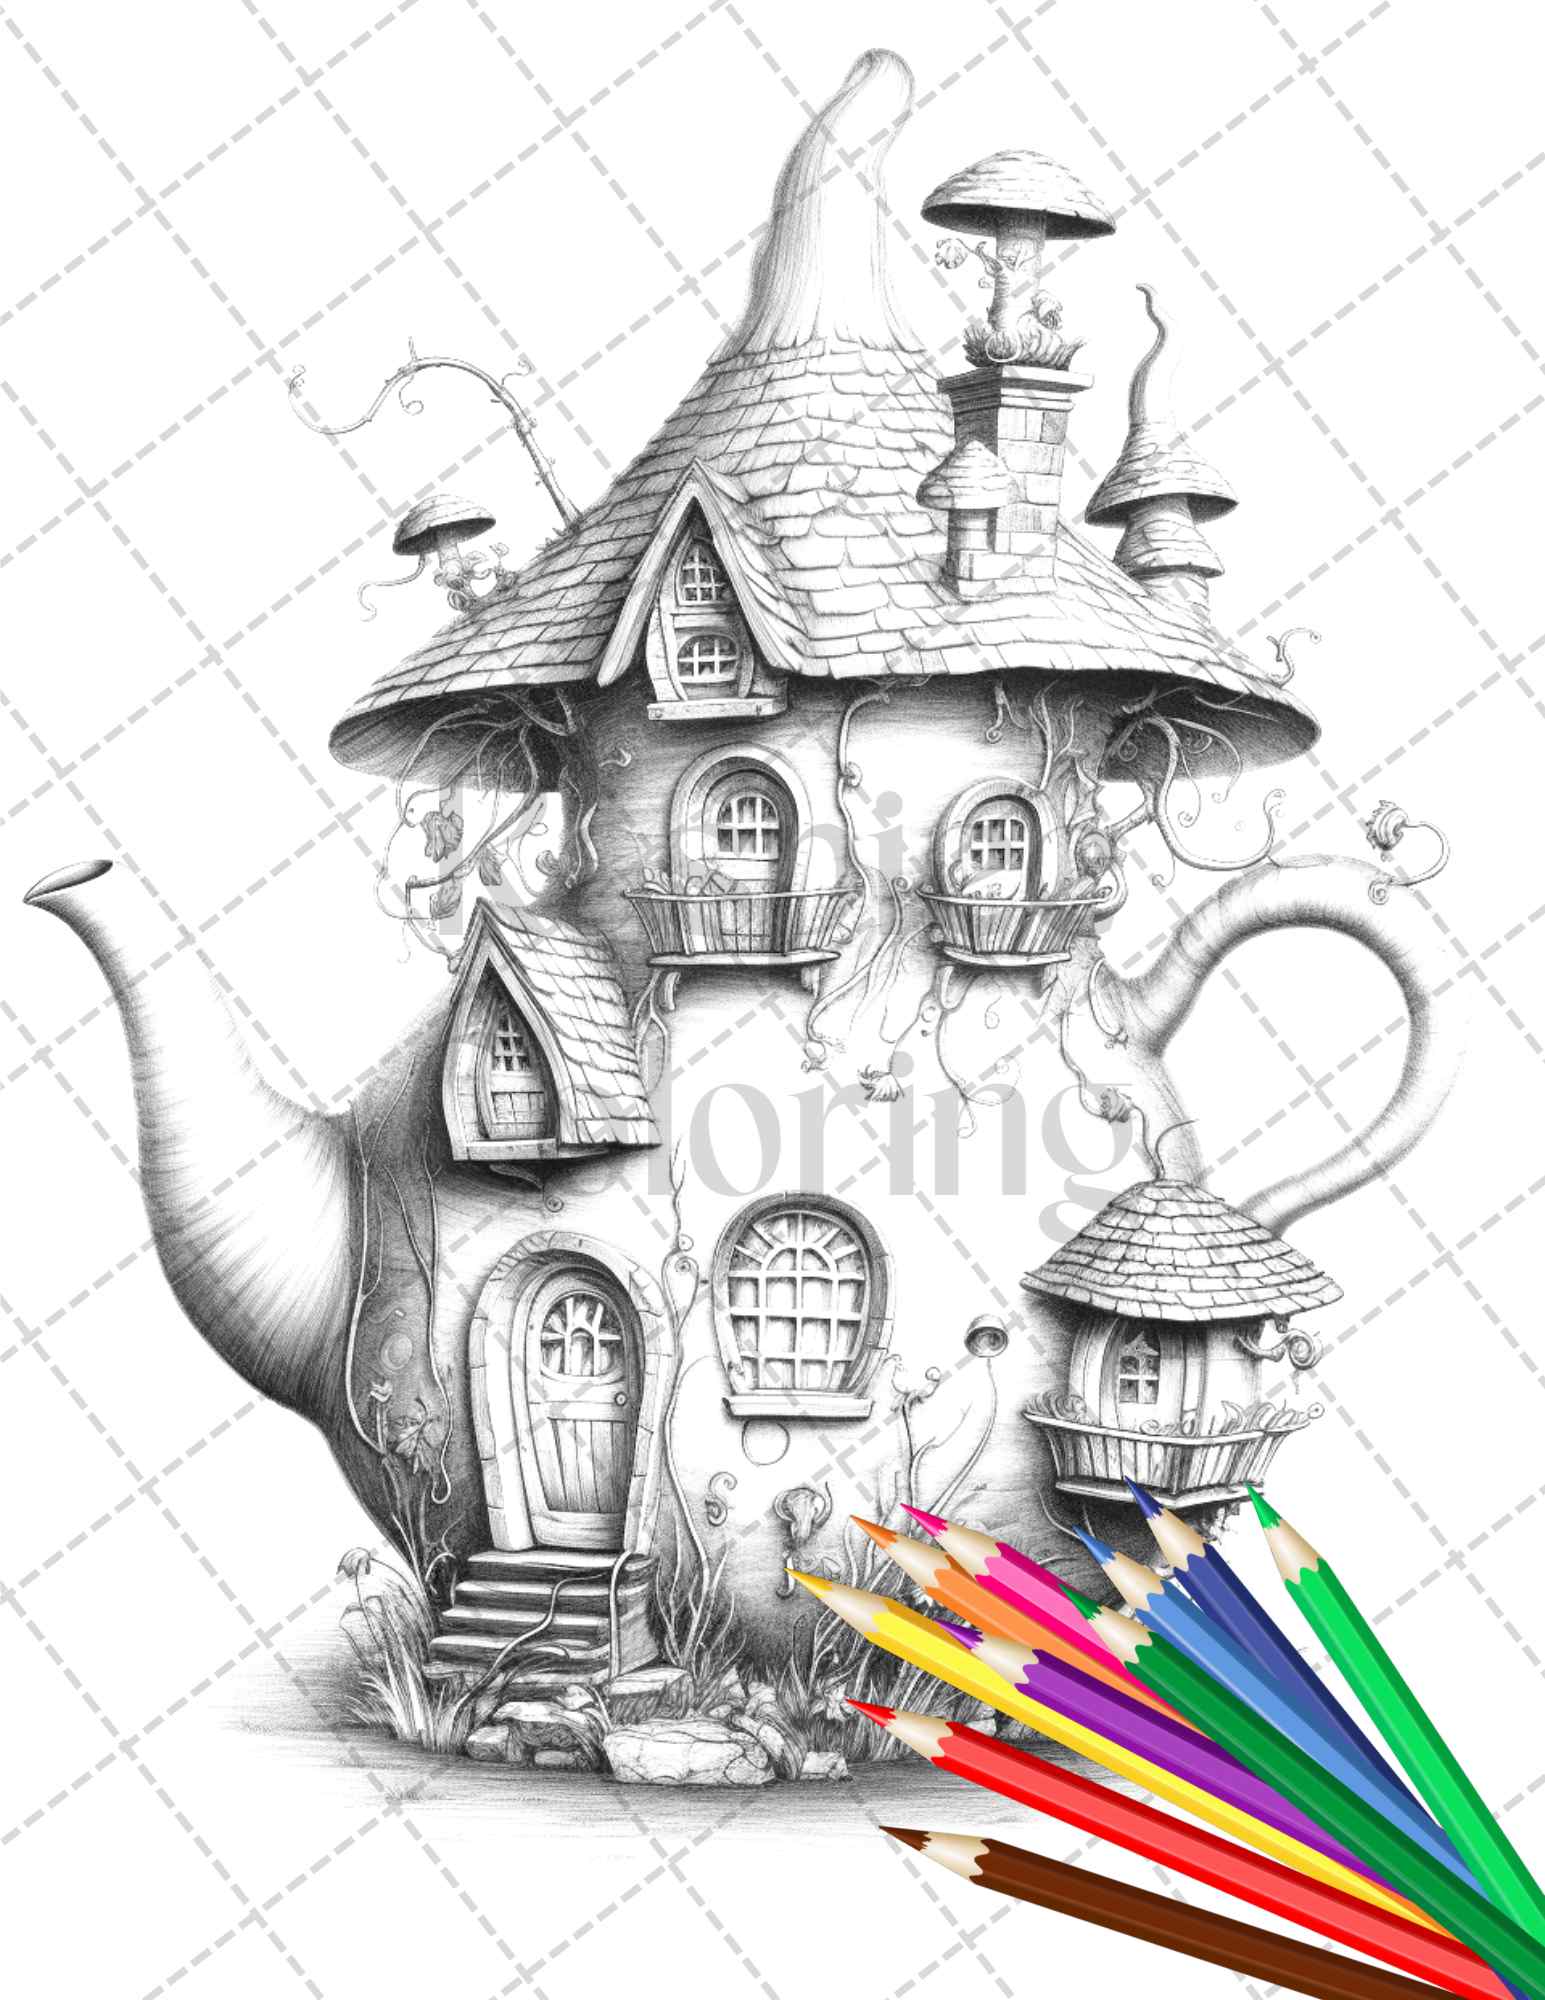 40 Teapot Fairy Houses Grayscale Coloring Pages Printable for Adults, PDF File Instant Download - raspiee